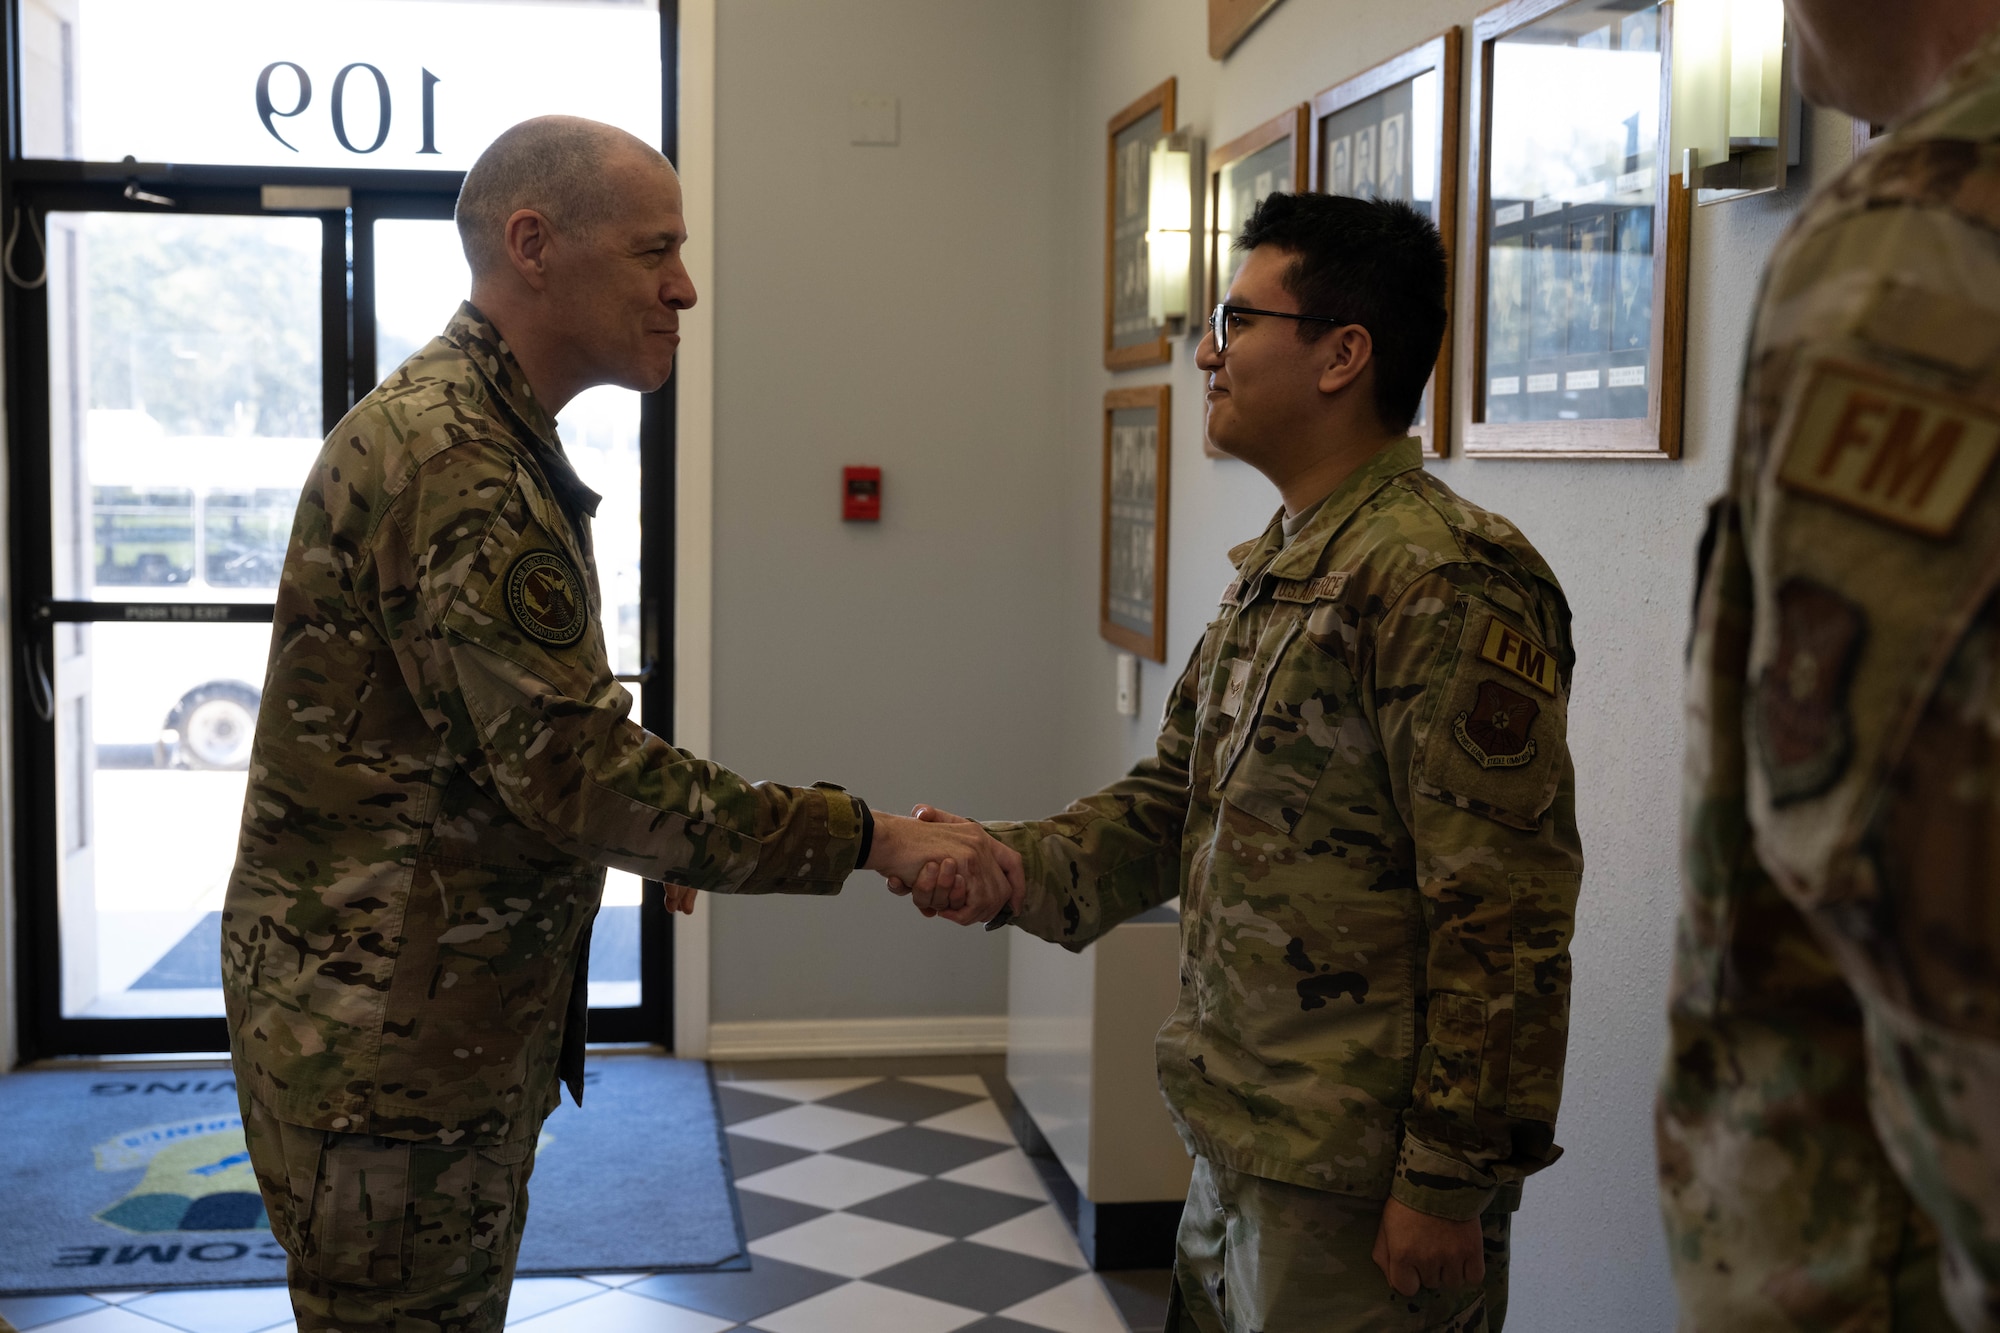 U.S. Air Force Gen. Thomas Bussiere, Air Force Global Strike Command commander, presents a coin to Airman 1st Class Jacob Romero, financial planner at the 2nd Comptroller Squadron, during a base tour, Barksdale Air Force Base, La., Jan. 26, 2023.